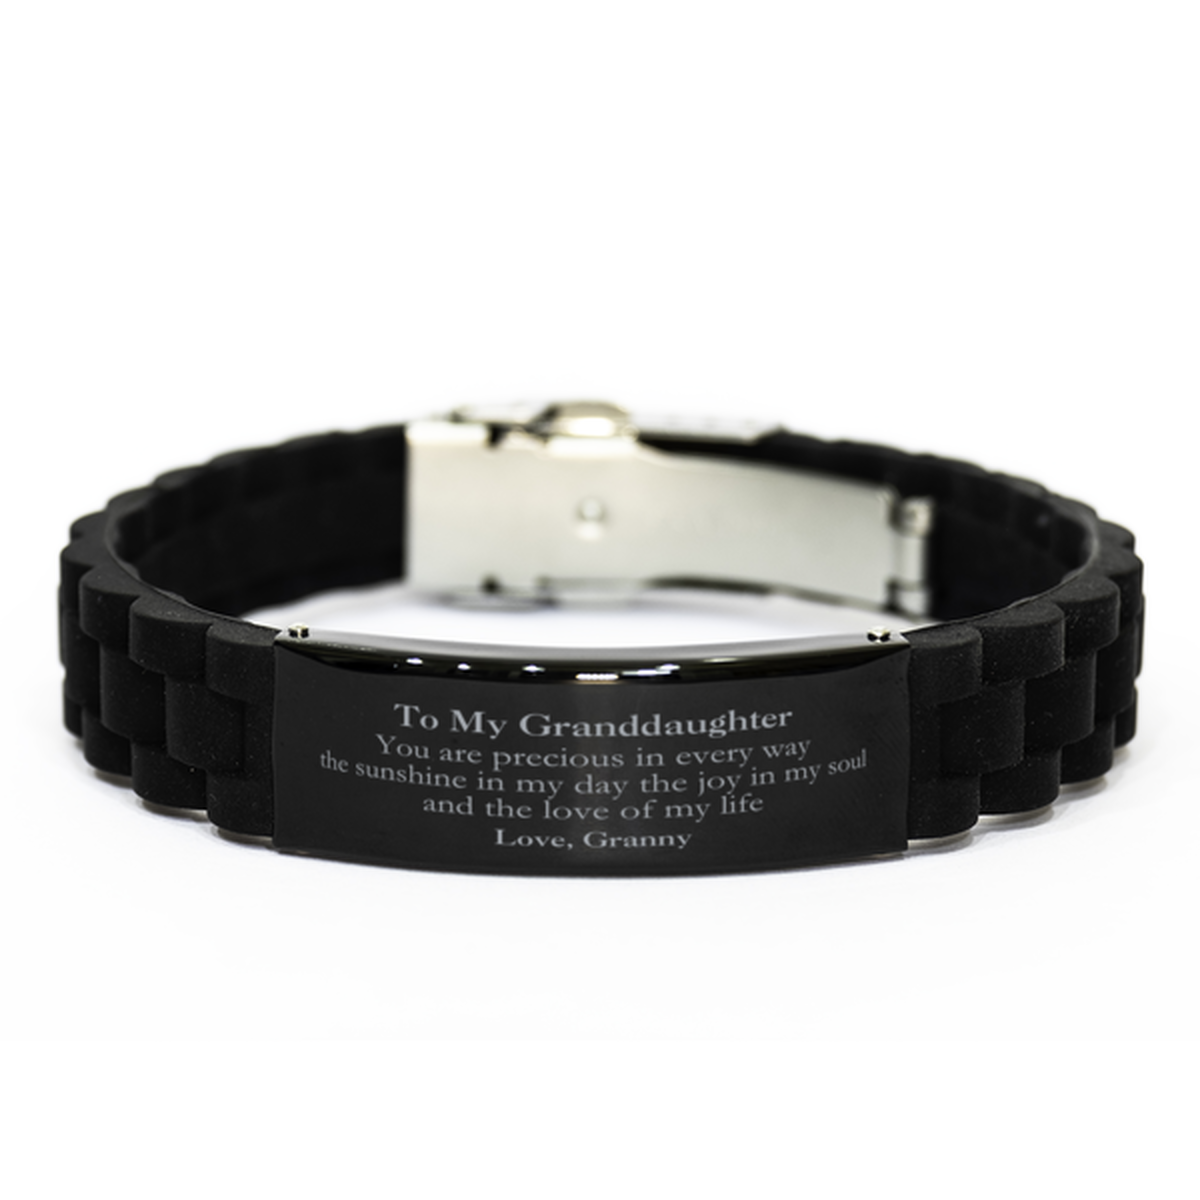 Graduation Gifts for Granddaughter Black Glidelock Clasp Bracelet Present from Granny, Christmas Granddaughter Birthday Gifts Granddaughter You are precious in every way the sunshine in my day. Love, Granny